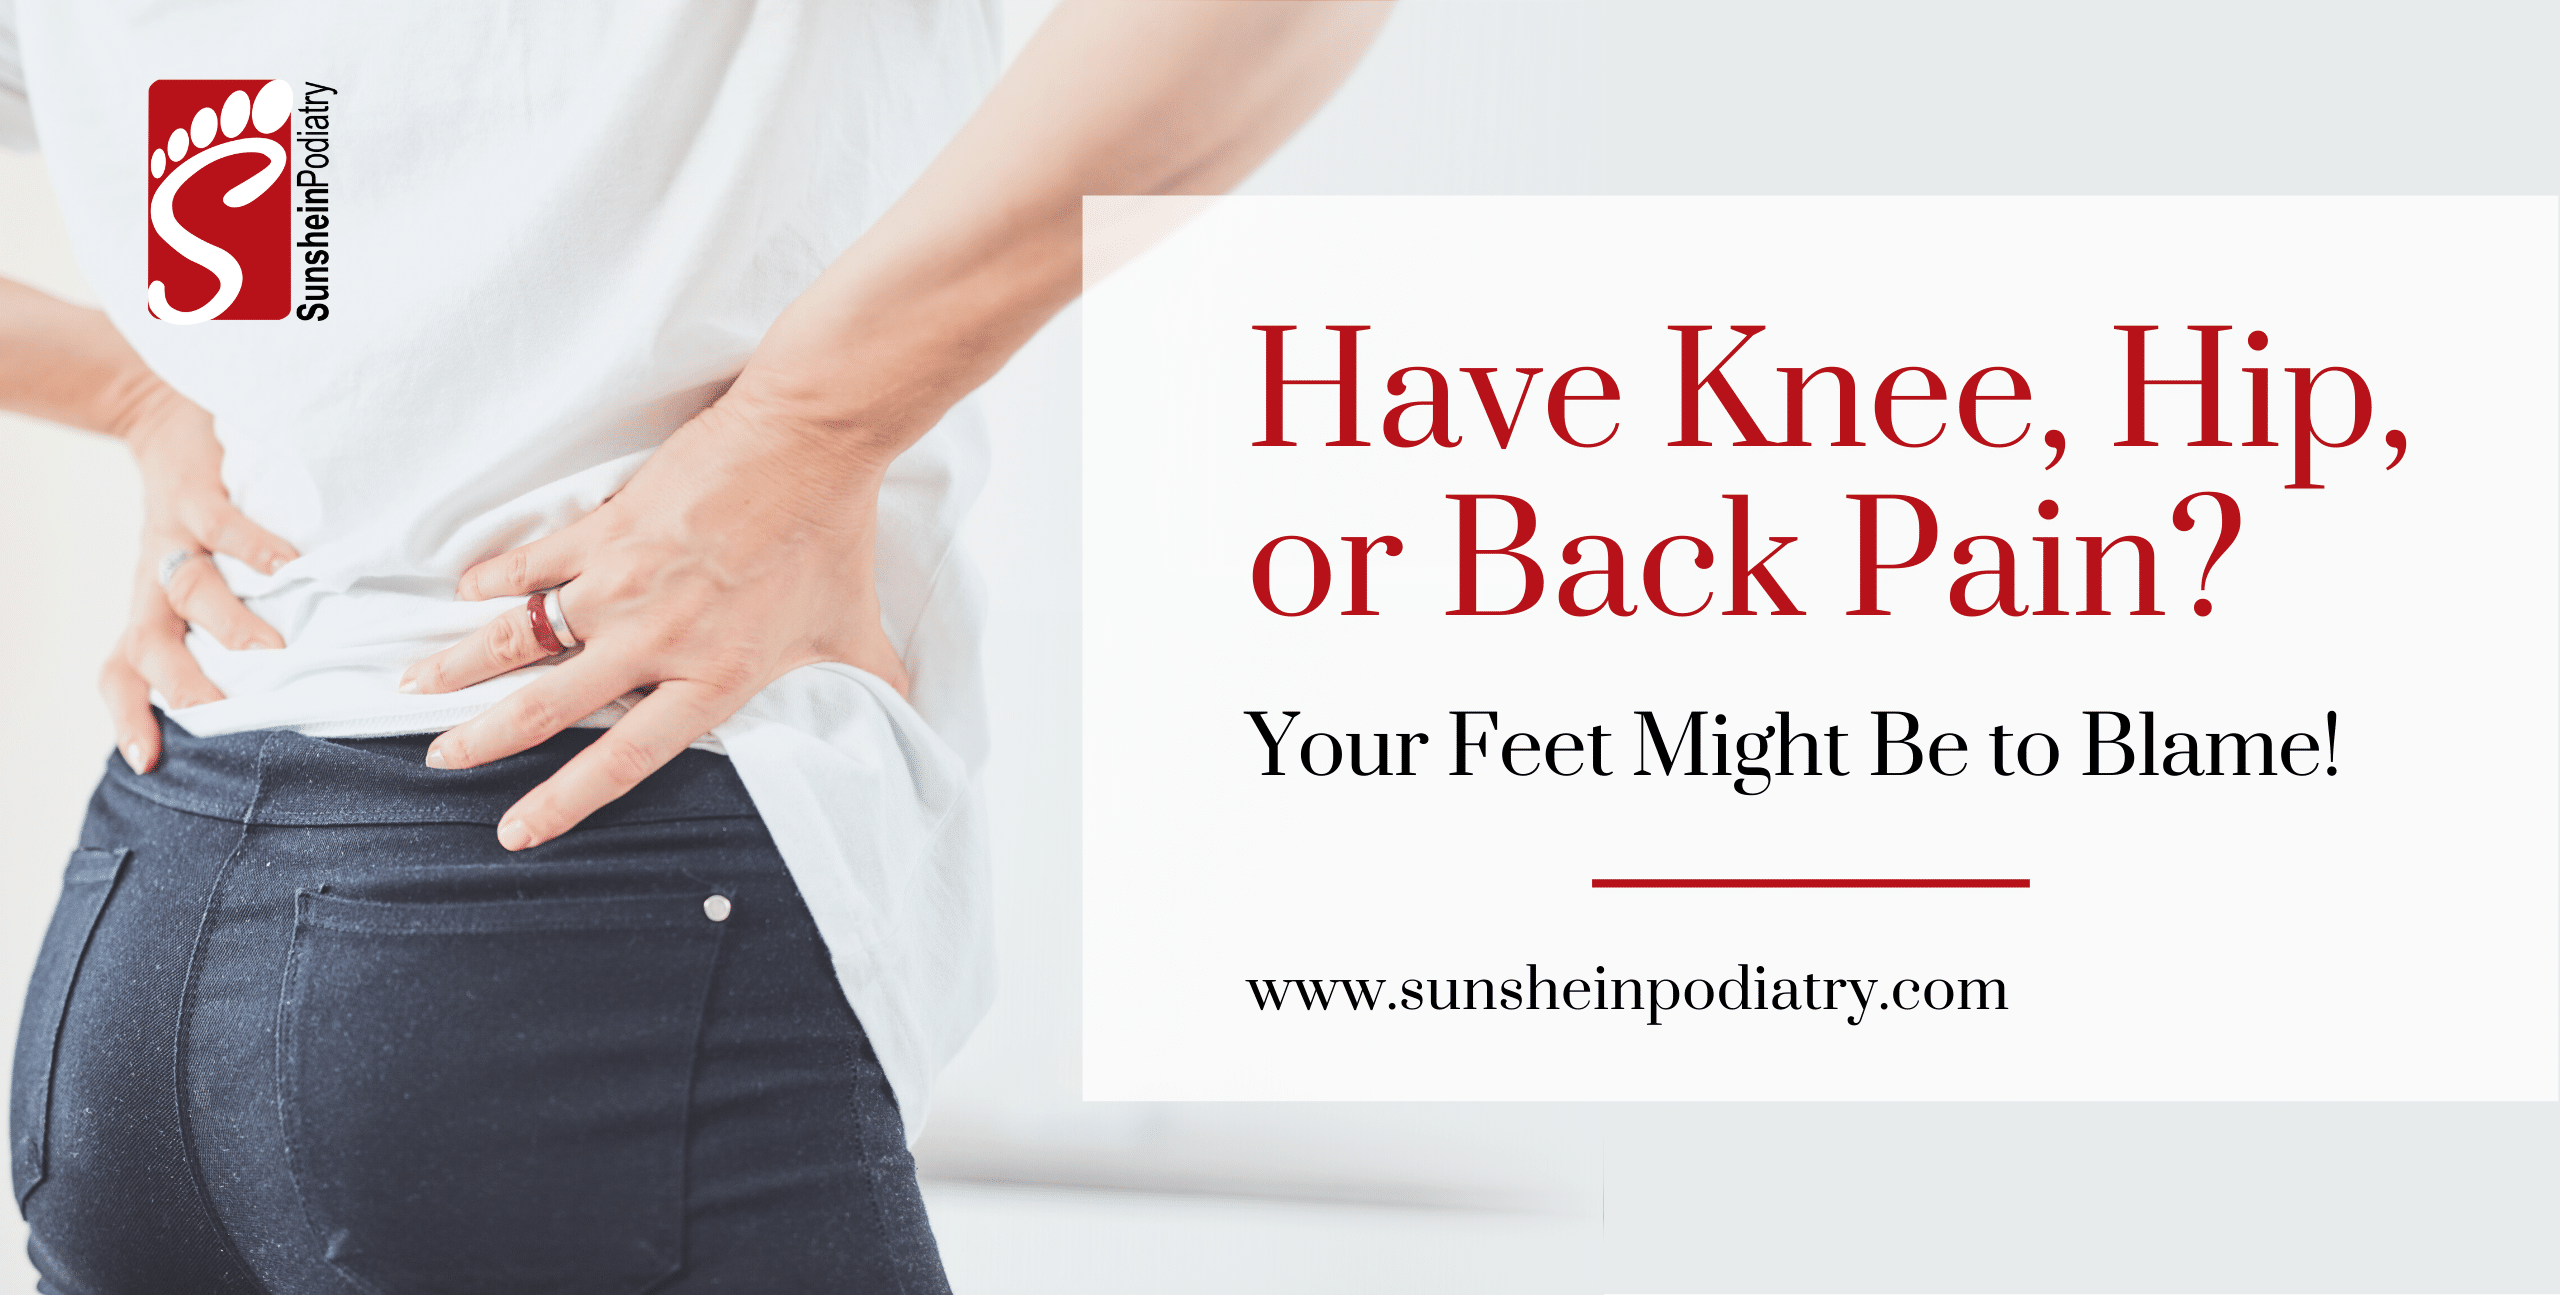 Have Knee, Hip, or Back Pain?